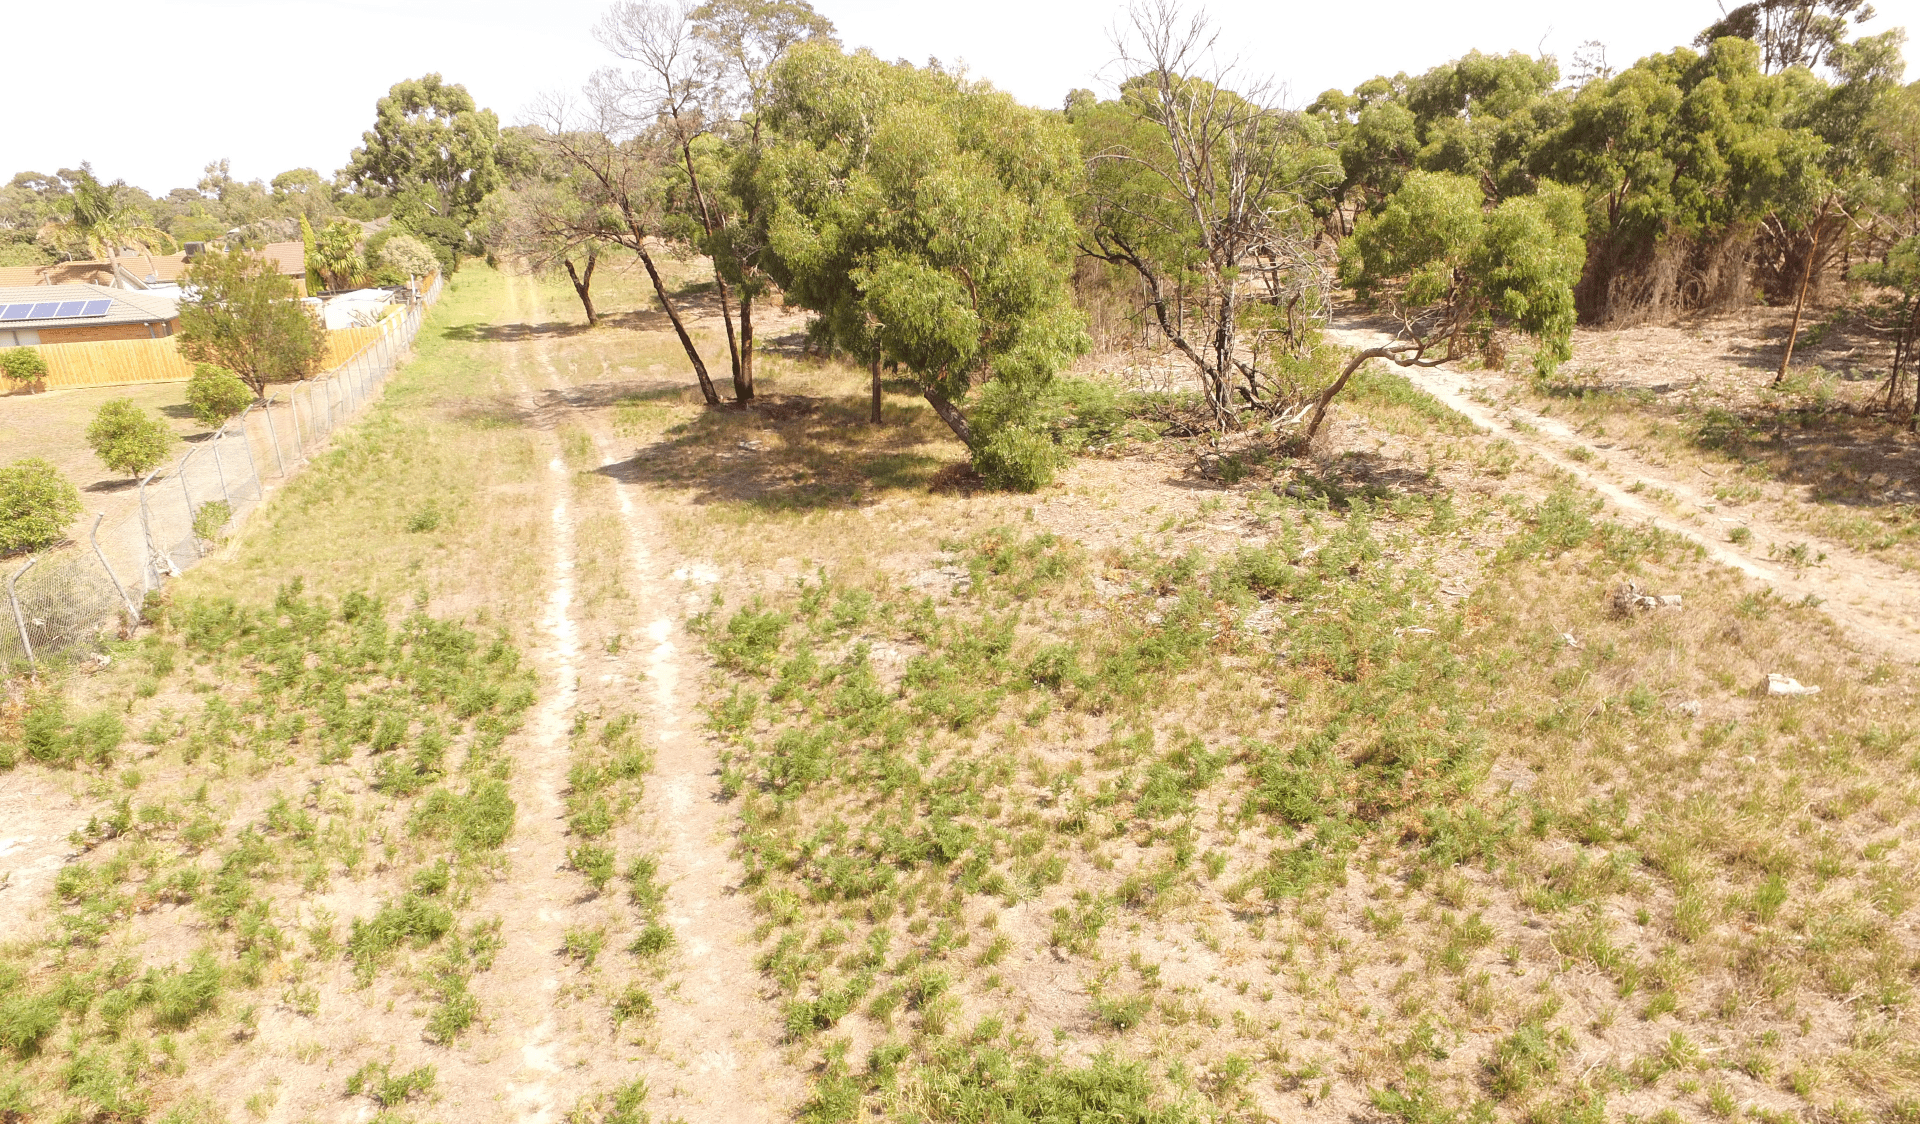 Dirt tracks running through the trees in The Pines Flora and Fauna Reserve